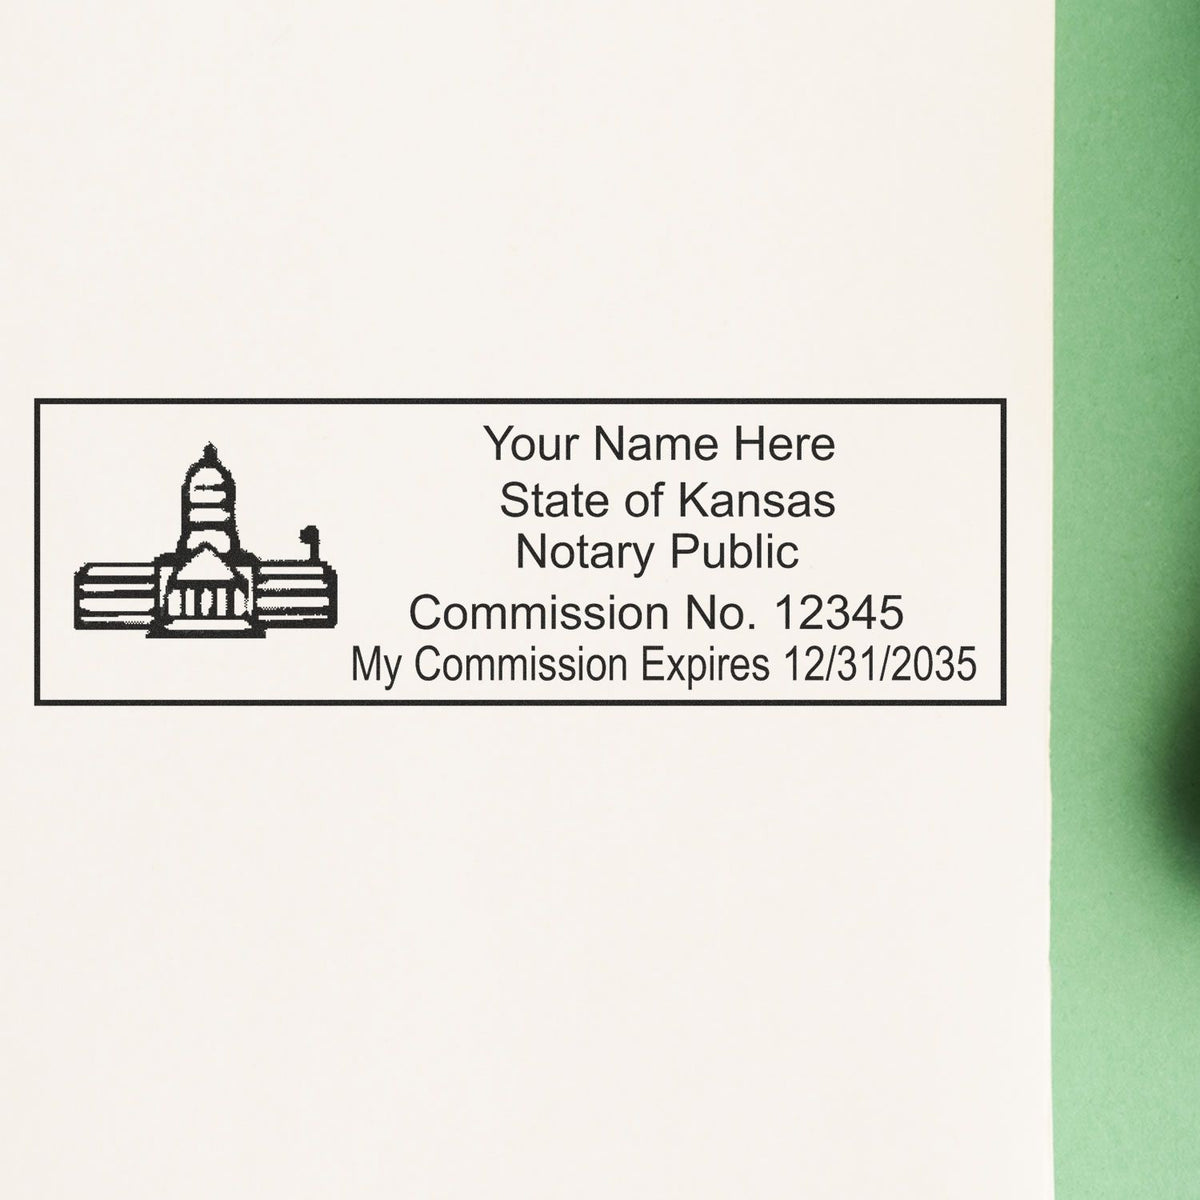 A lifestyle photo showing a stamped image of the Heavy-Duty Kansas Rectangular Notary Stamp on a piece of paper